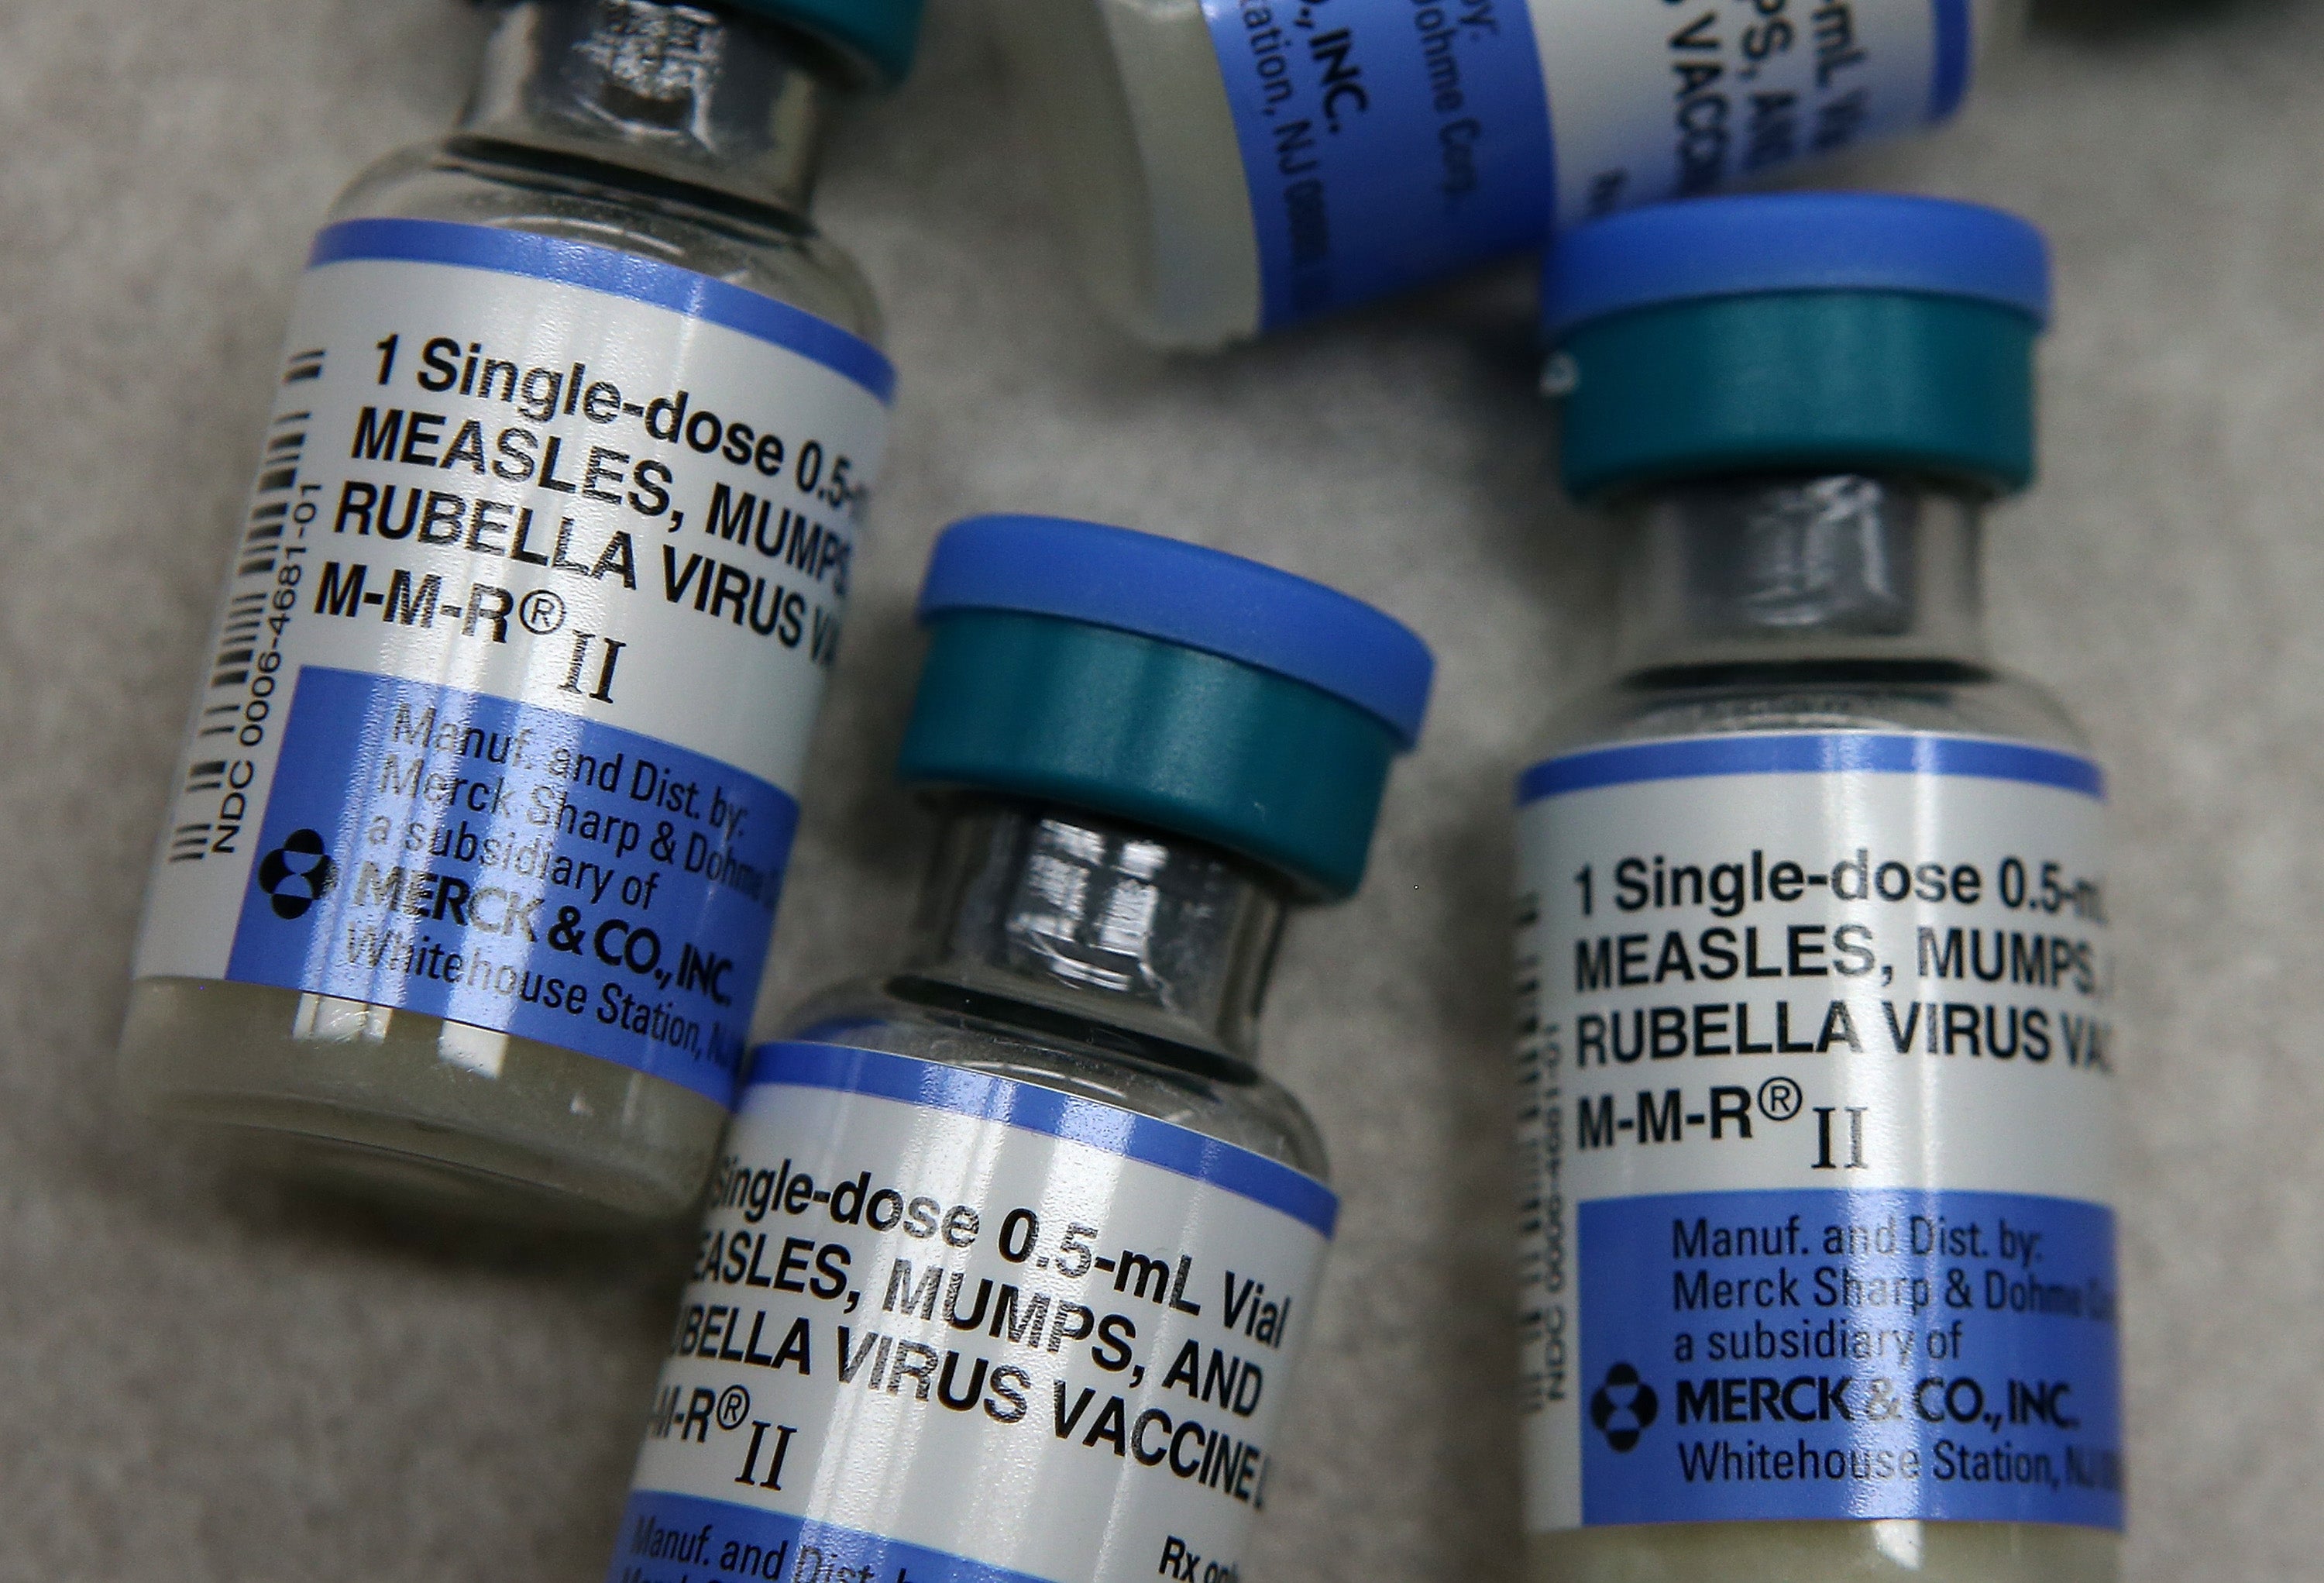 Vials of the highly effective combination measles, mumps, and rubella (MMR) vaccine. (Photo: Justin Sullivan, Getty Images)